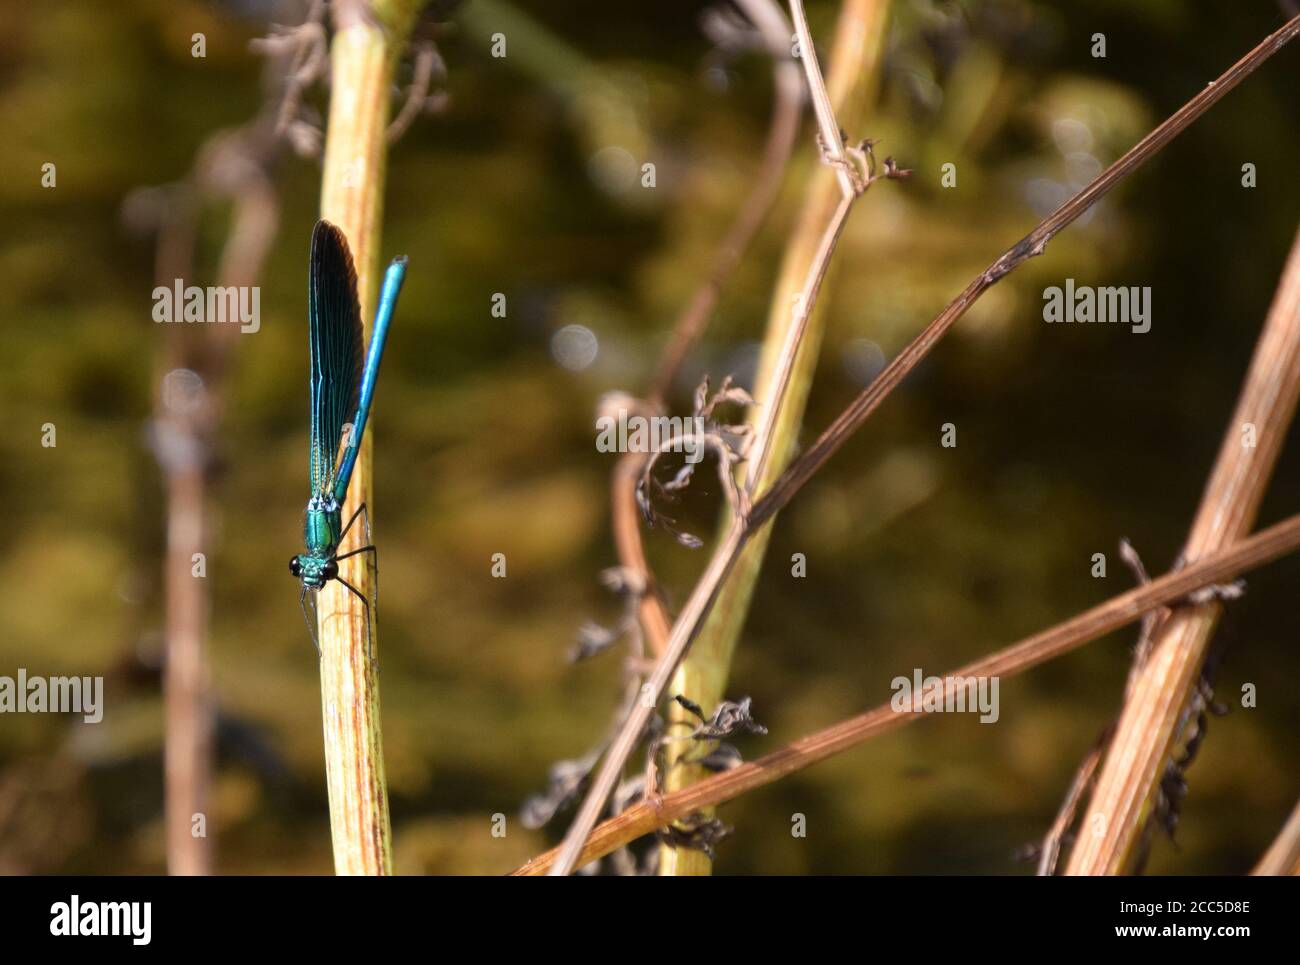 Demoiselle Agrion in contrast with undergrowth Stock Photo